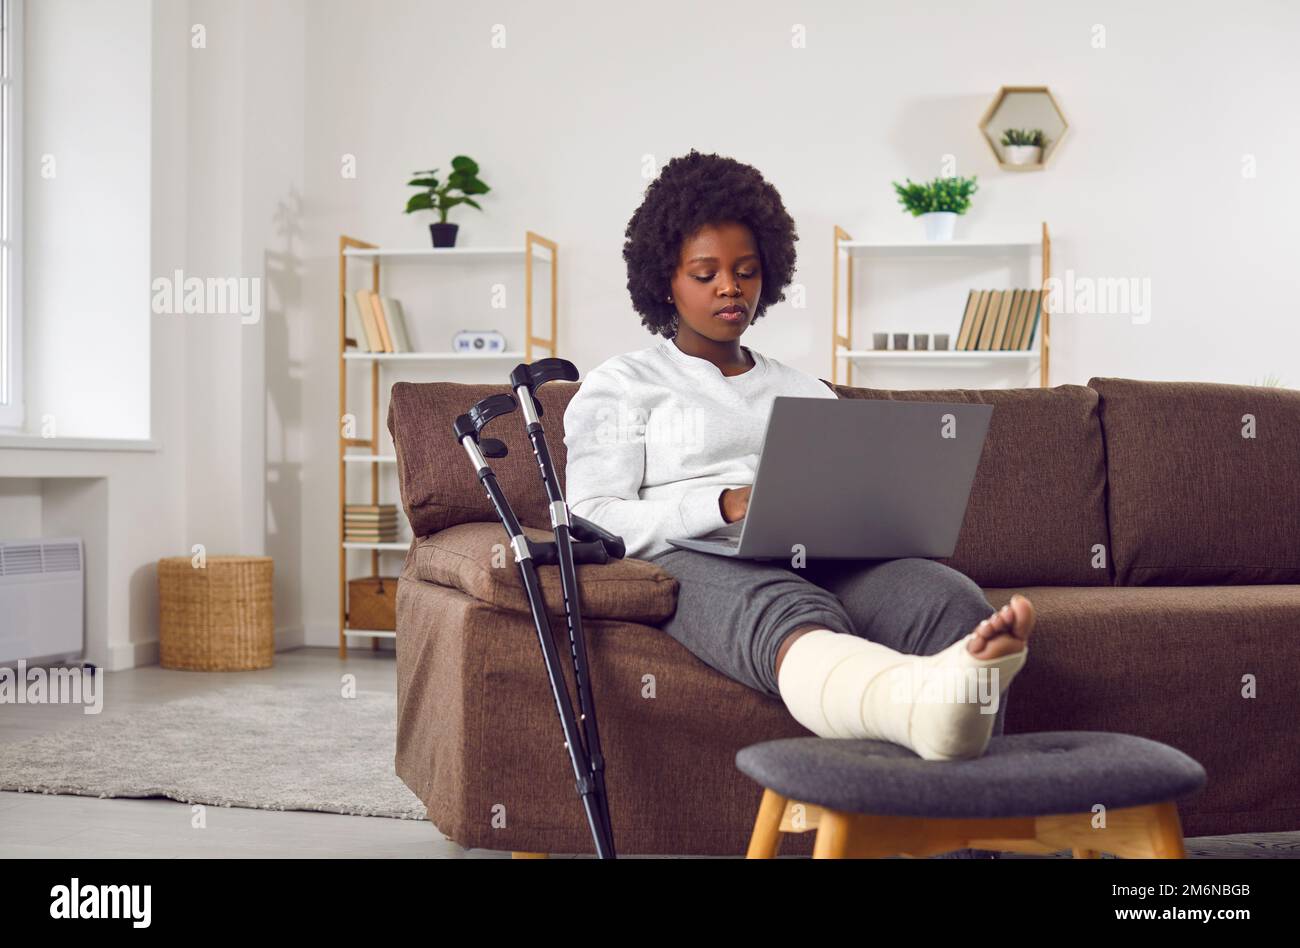 Attractive African American woman with broken leg in cast is sitting on the sofa in the living room with laptop in hands. Stock Photo